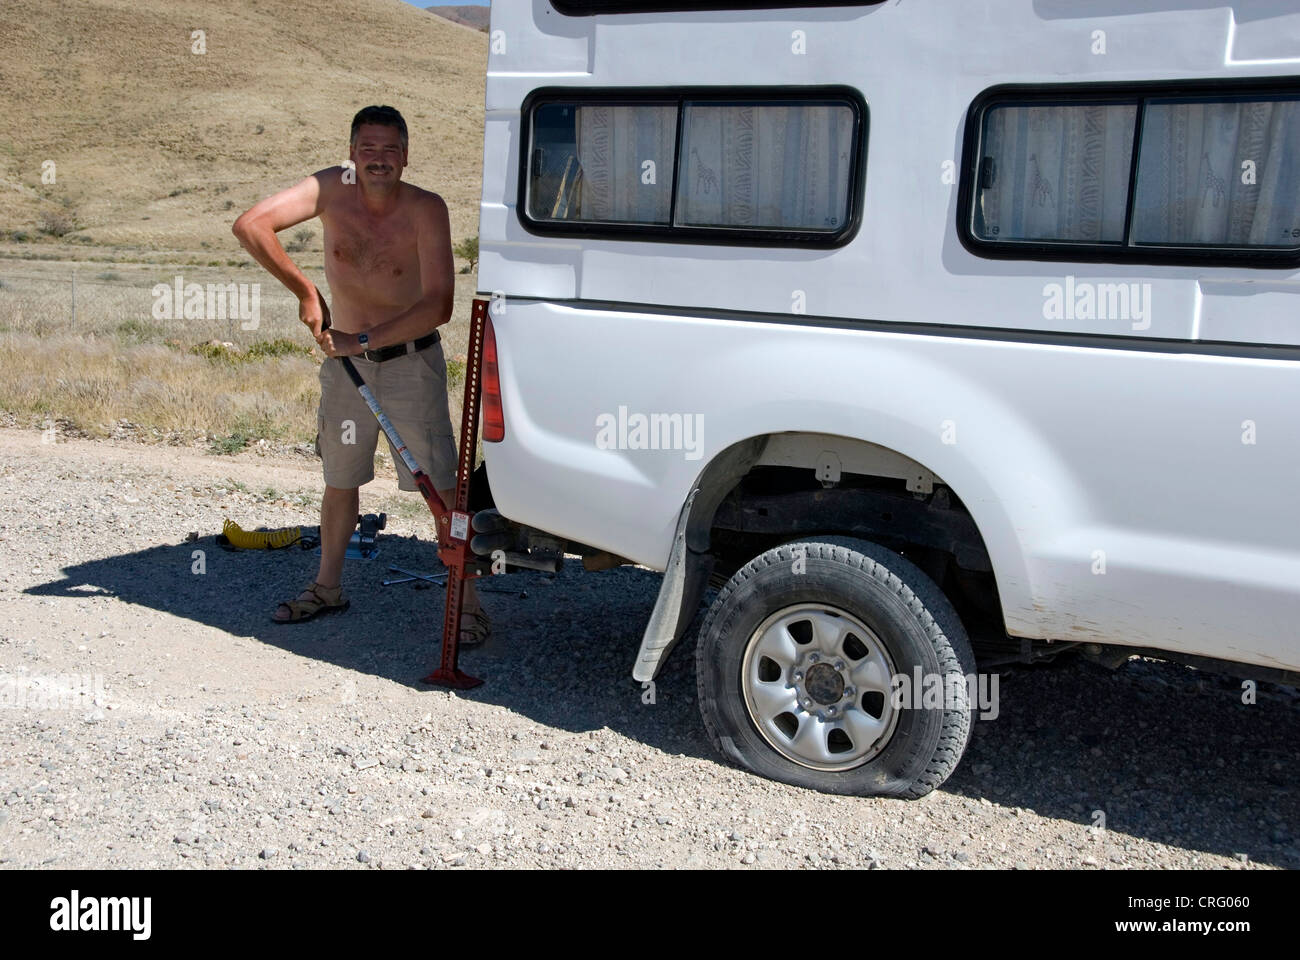 man with HiJack, lifting the car to change a flat tyre, Namibia Stock Photo